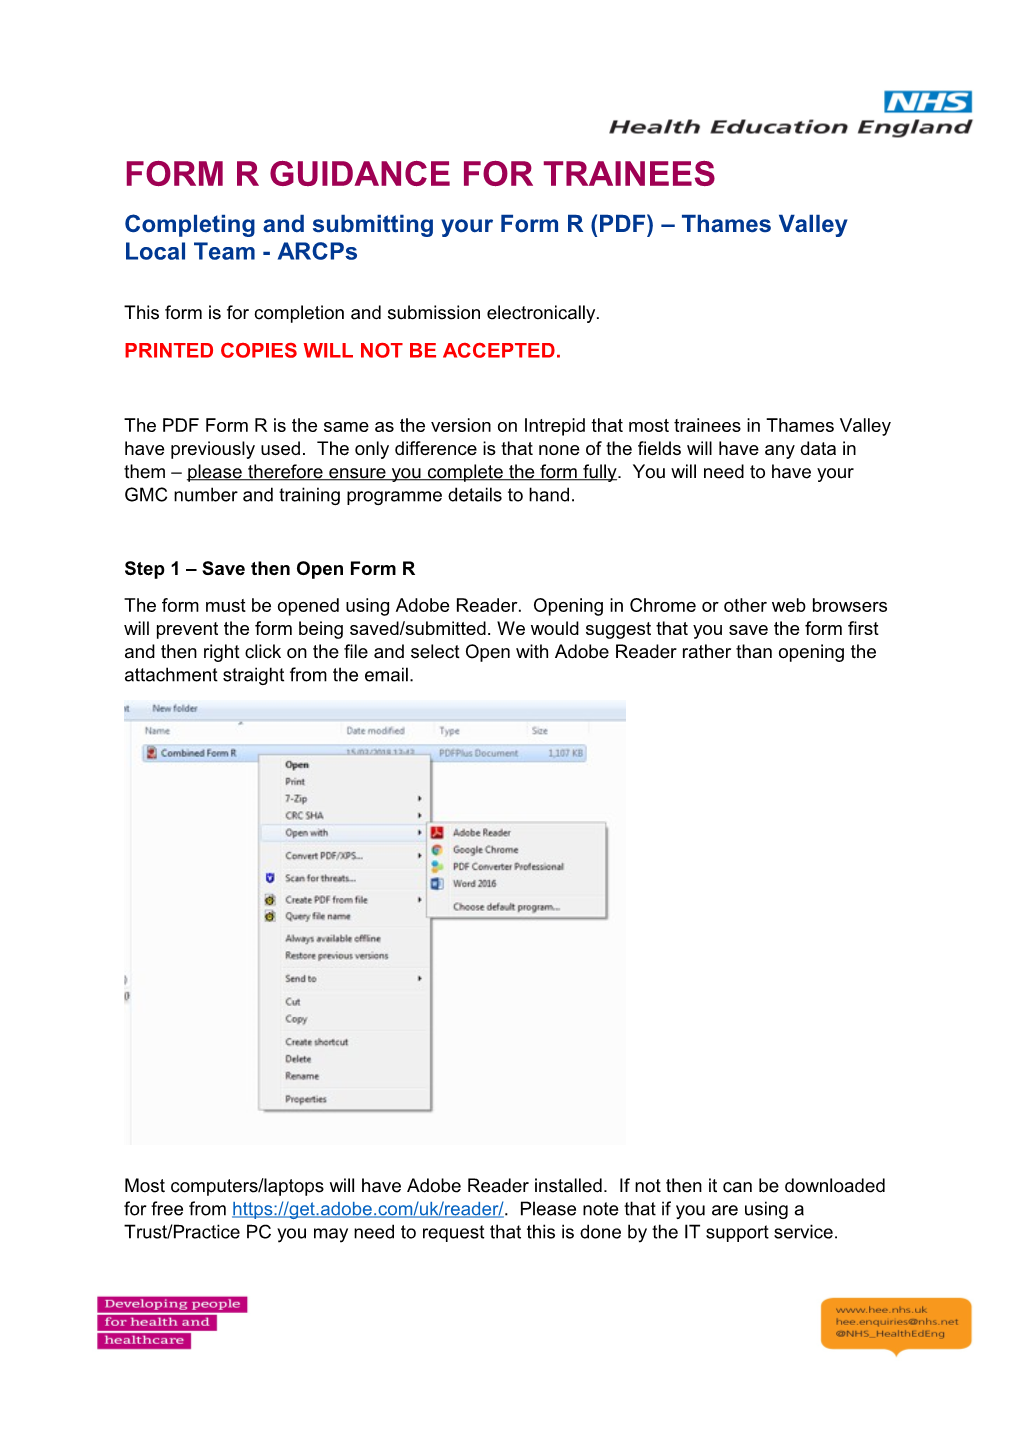 Completing and Submitting Your Form R (PDF) Thames Valley Local Team - Arcps